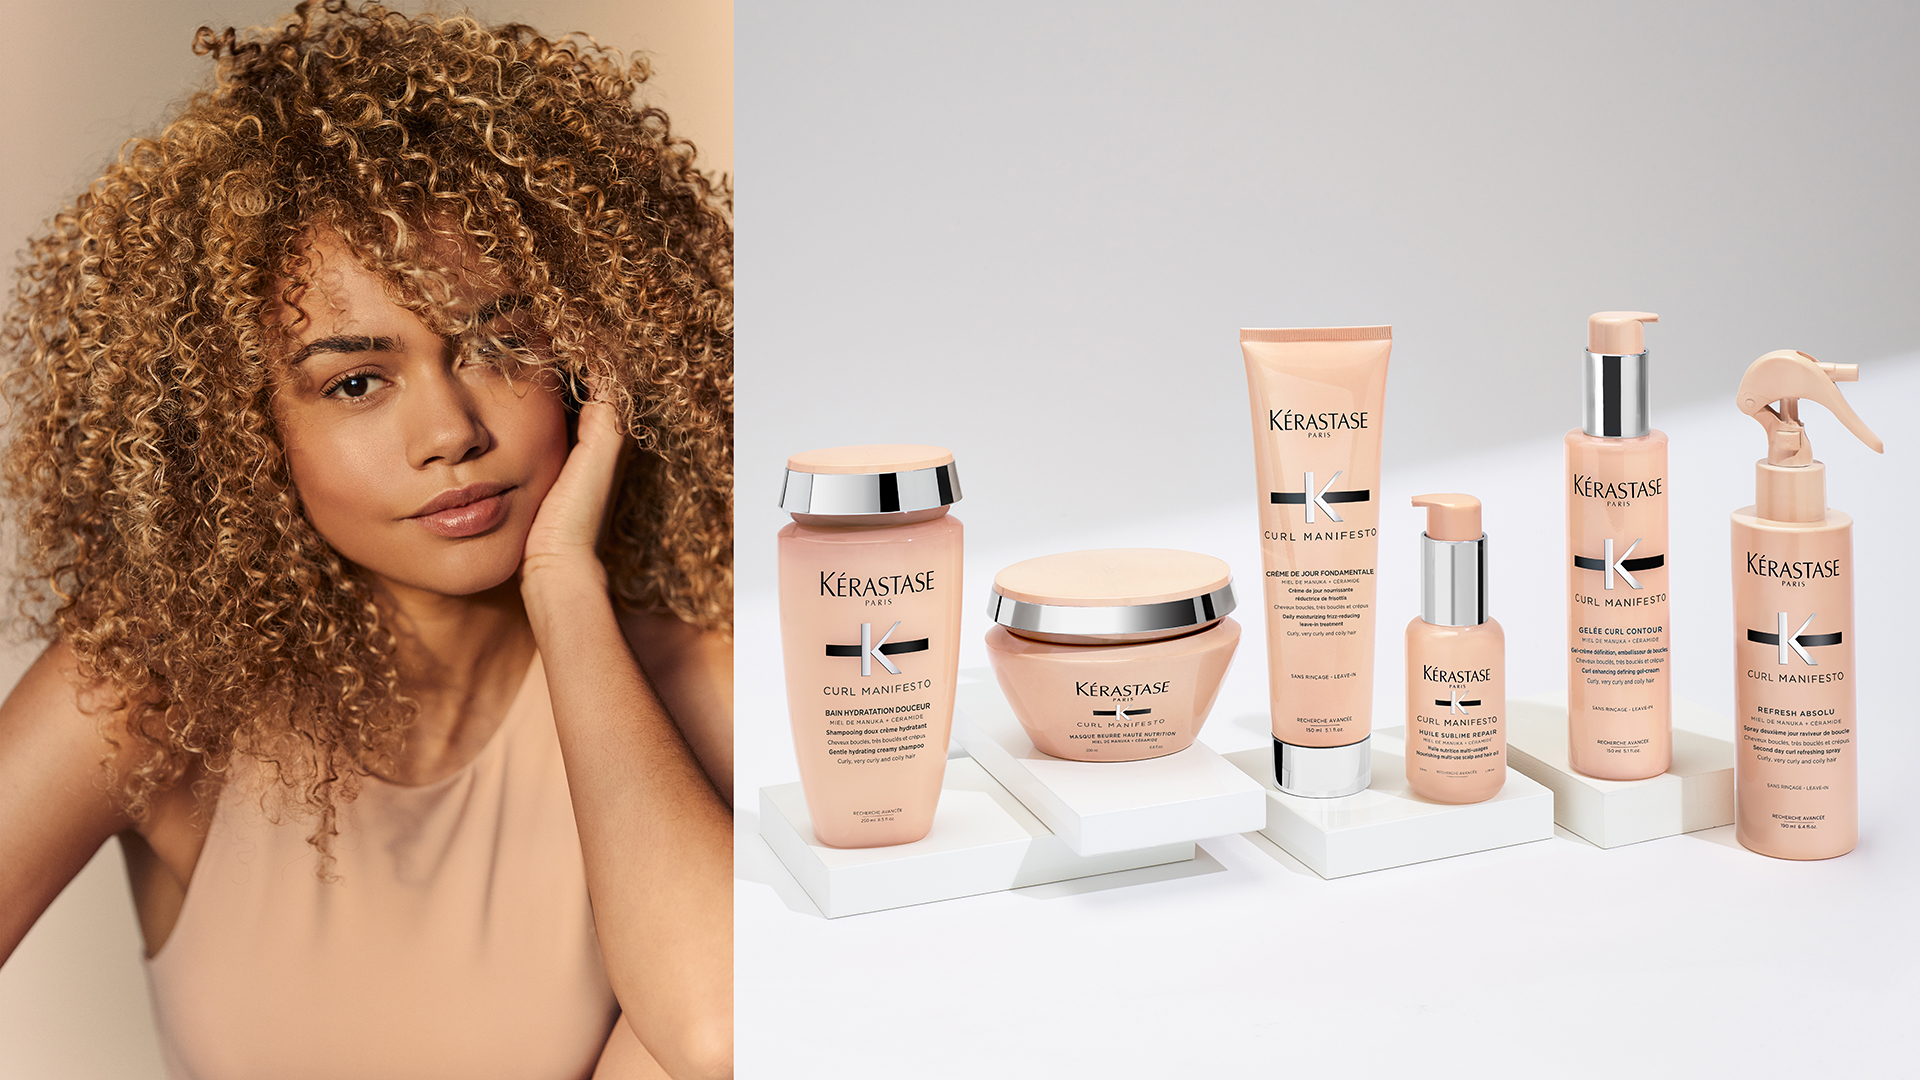 Kérastase Curl Manifesto has launched for all curl types | Woman & Home